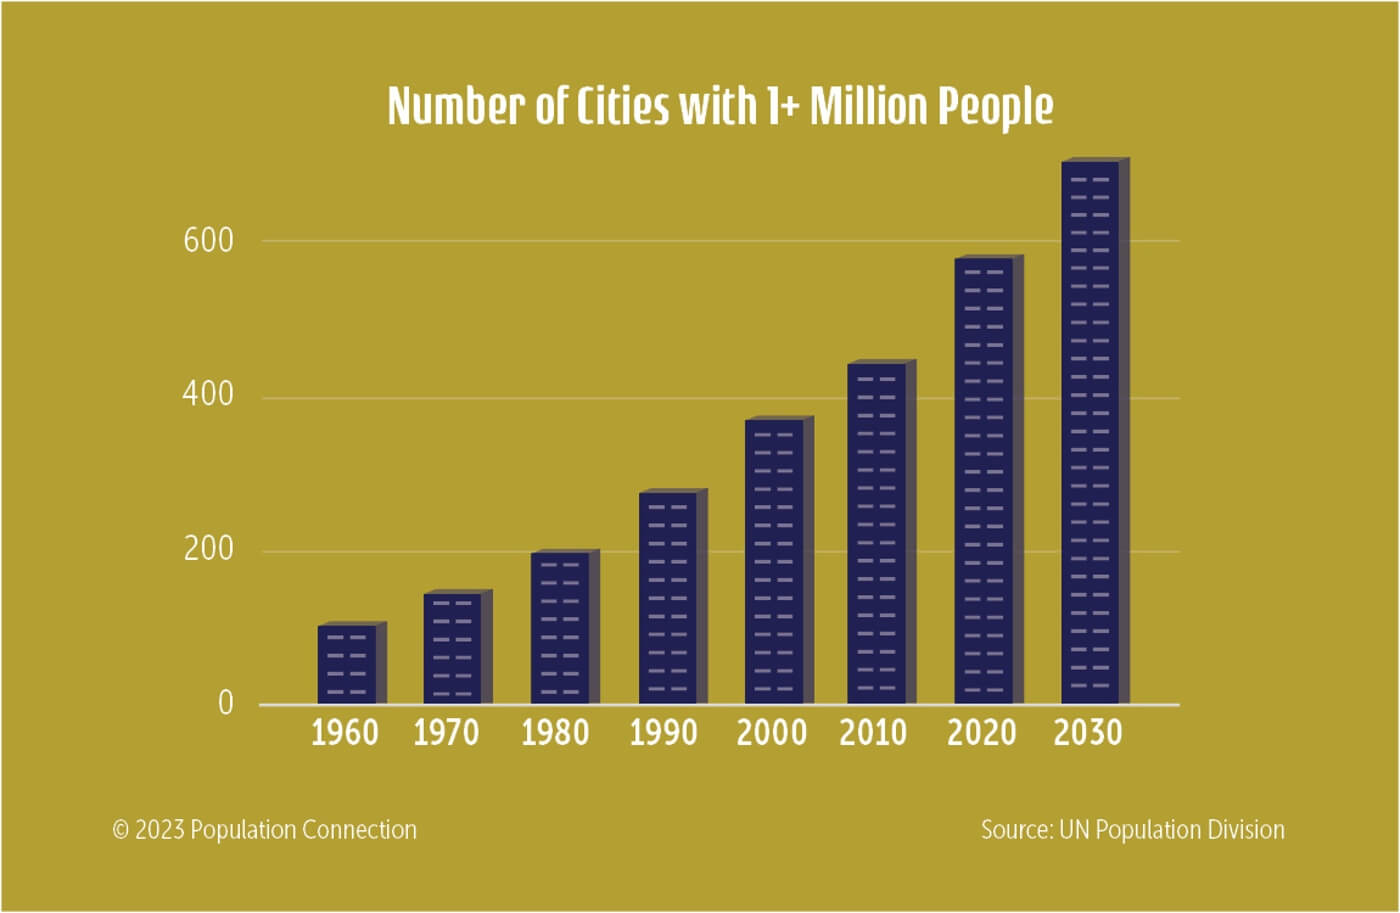 A graph of the rising number of cities with more than 1 million people